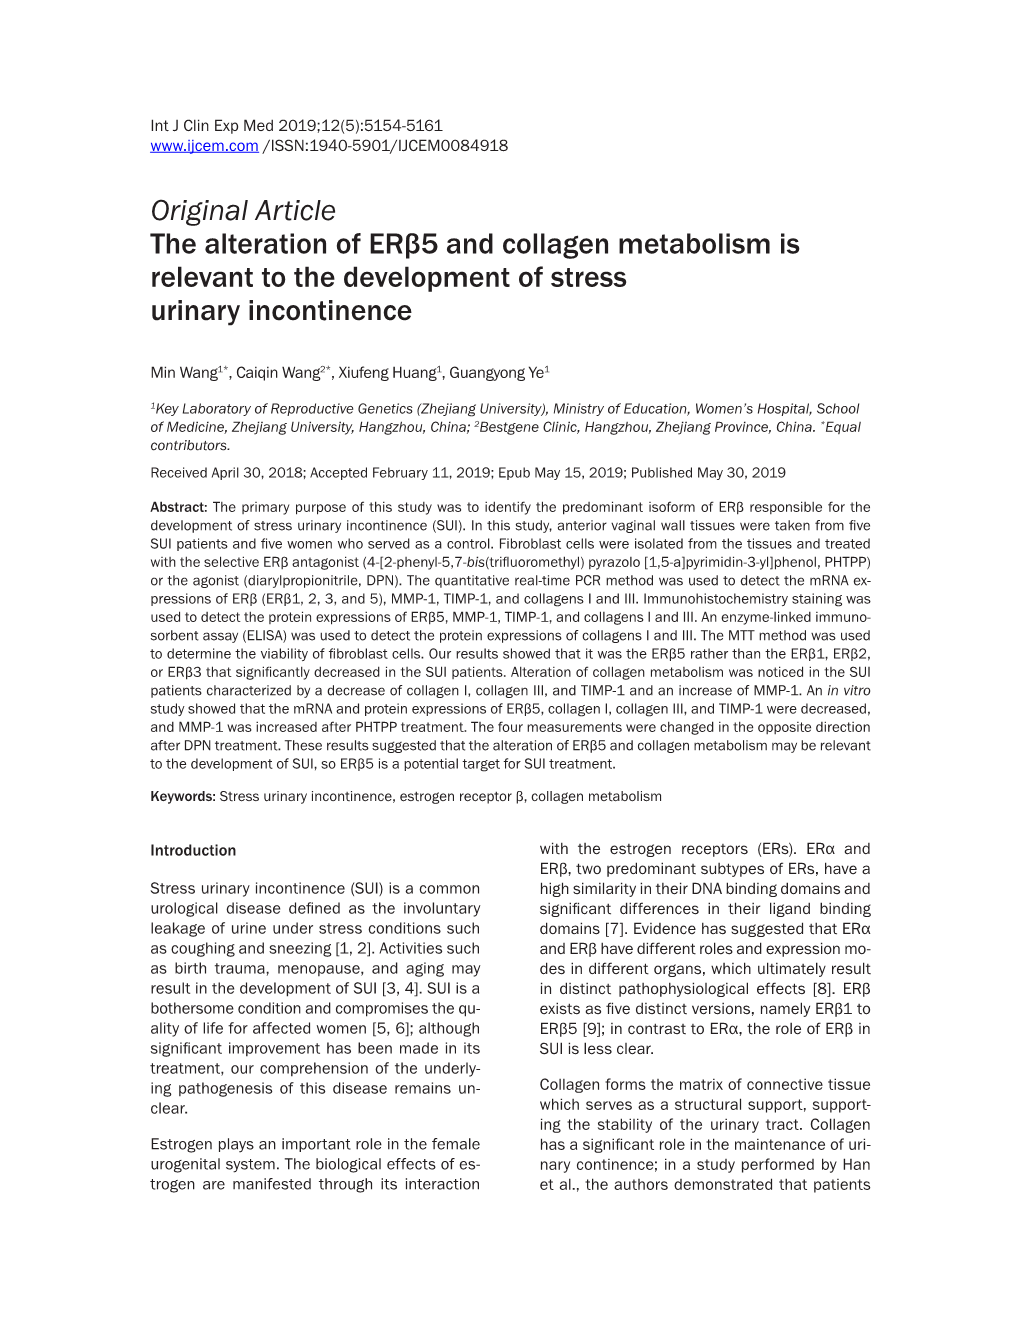 Original Article the Alteration of Erβ5 and Collagen Metabolism Is Relevant to the Development of Stress Urinary Incontinence